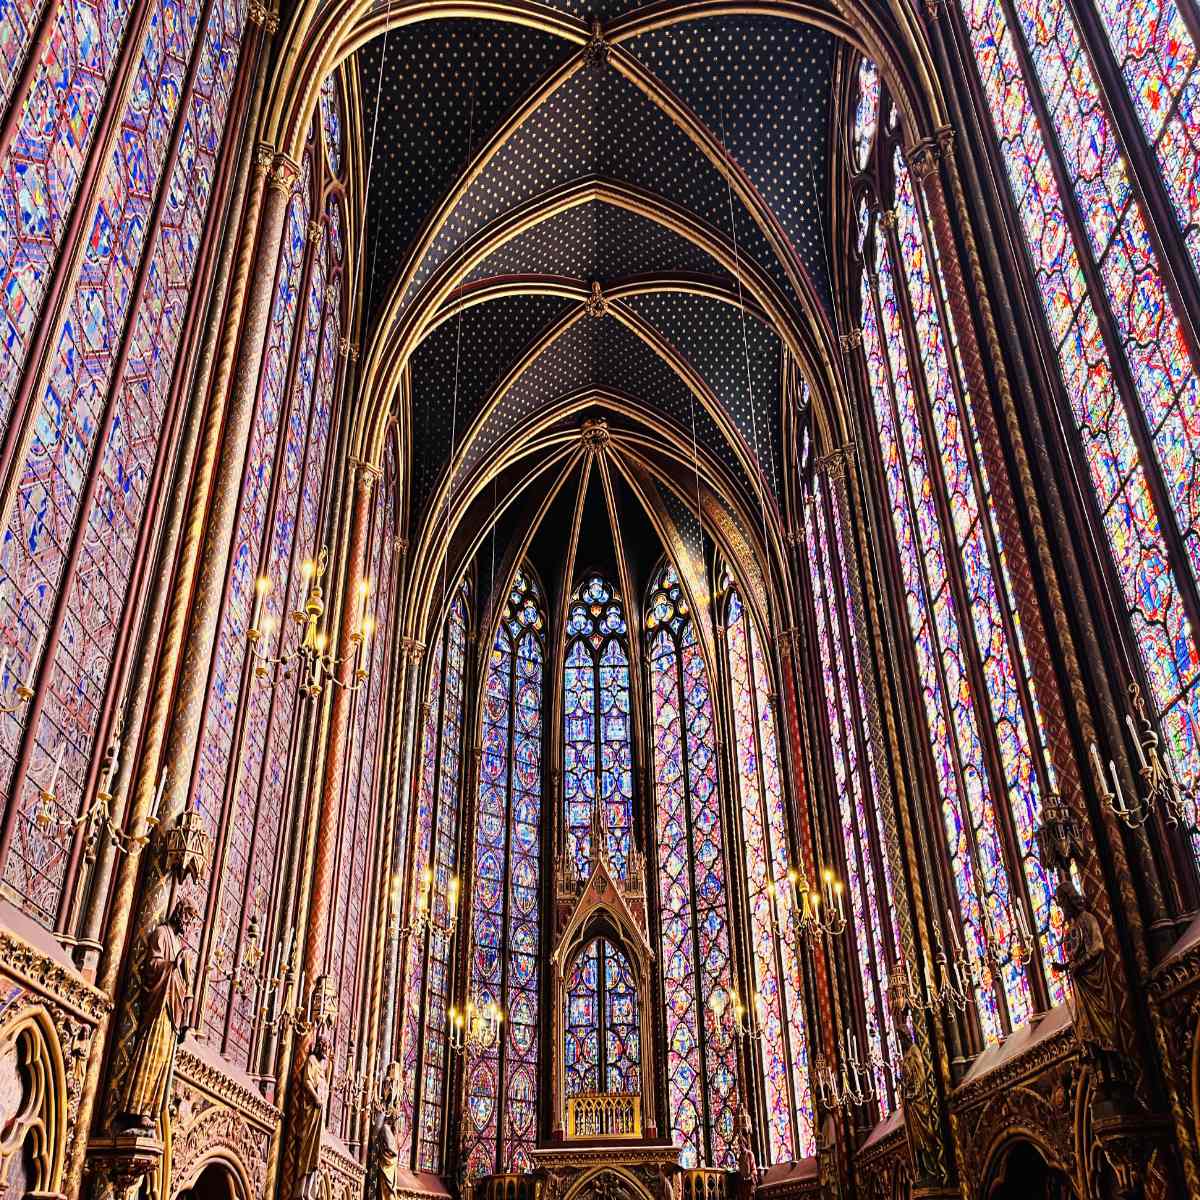 You are currently viewing Sainte Chapelle Paris: 14 Facts, history and visit guide